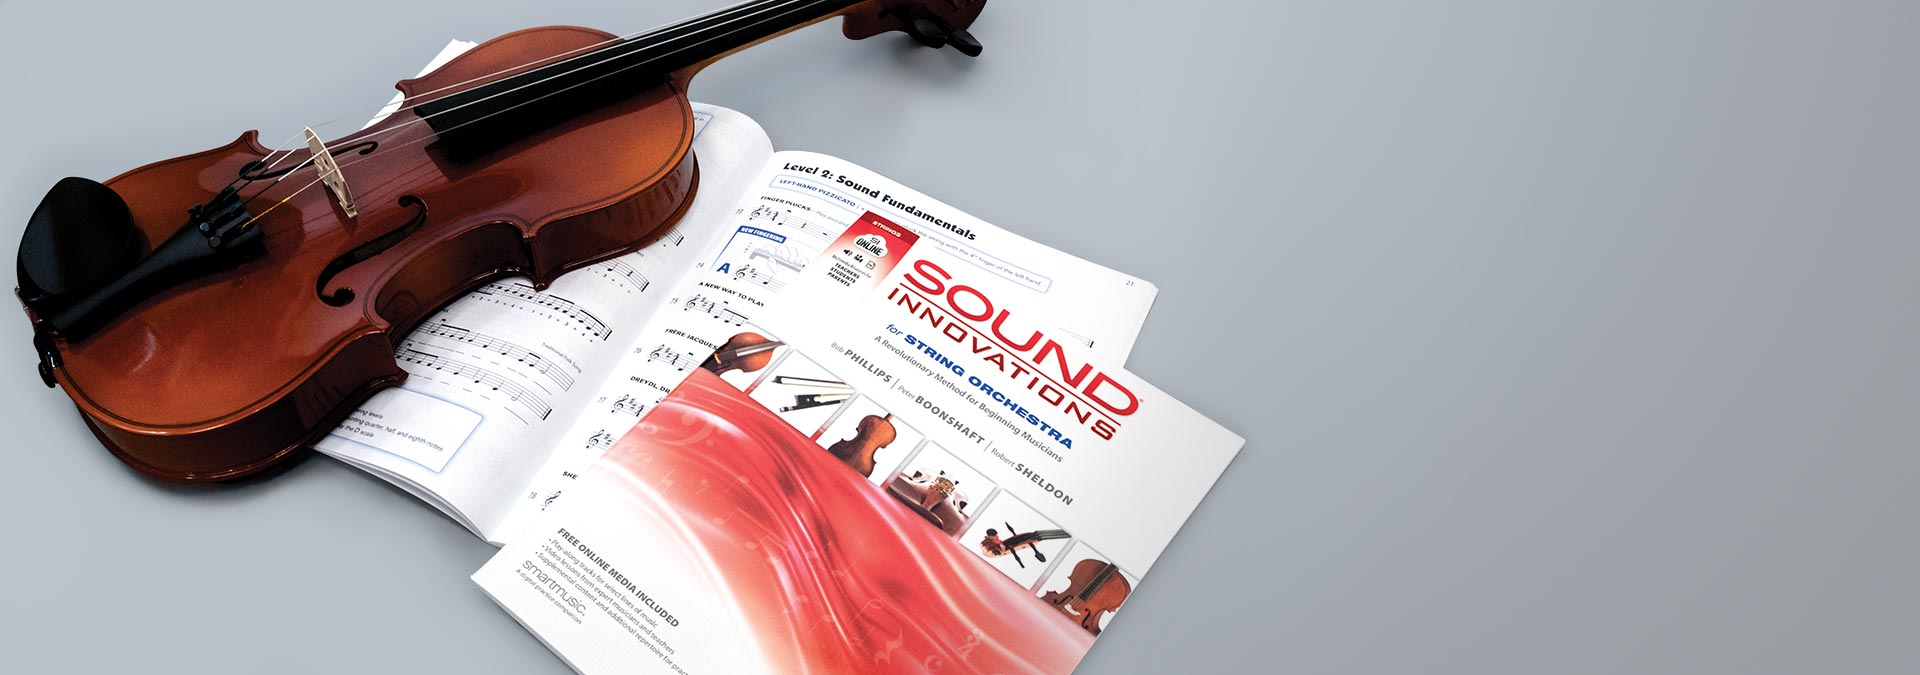 Sound Innovations Books Are Available as eBooks